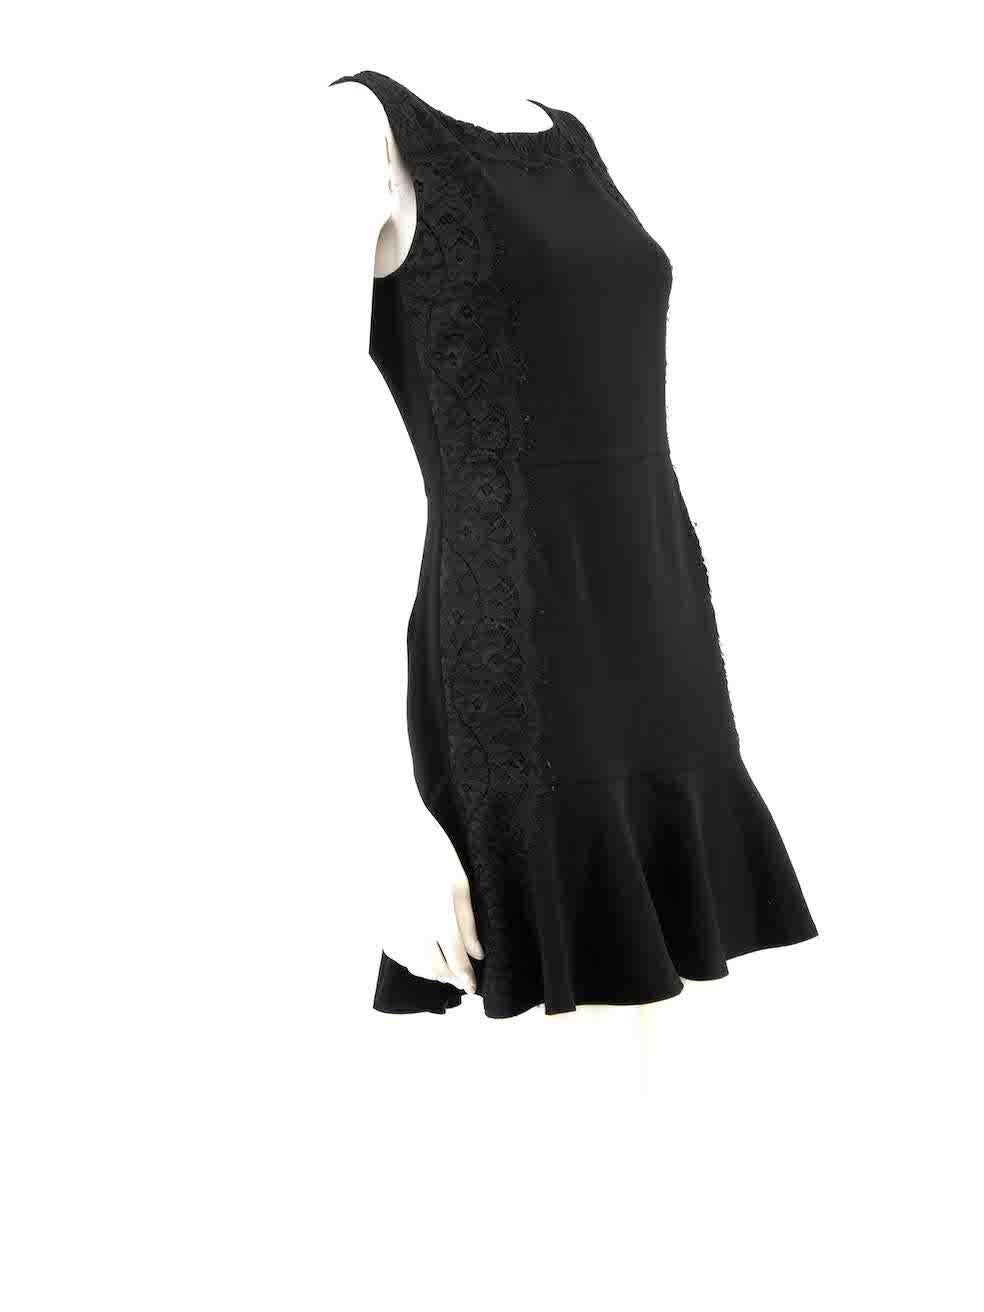 CONDITION is Very good. Minimal wear to dress is evident. Minimal wear to the lace trims with light fraying on this used Sandro designer resale item.
 
 Details
 Black
 Polyester
 Dress
 Mini
 Sleeveless
 Round neck
 Lace trim
 Flared skirt hem
